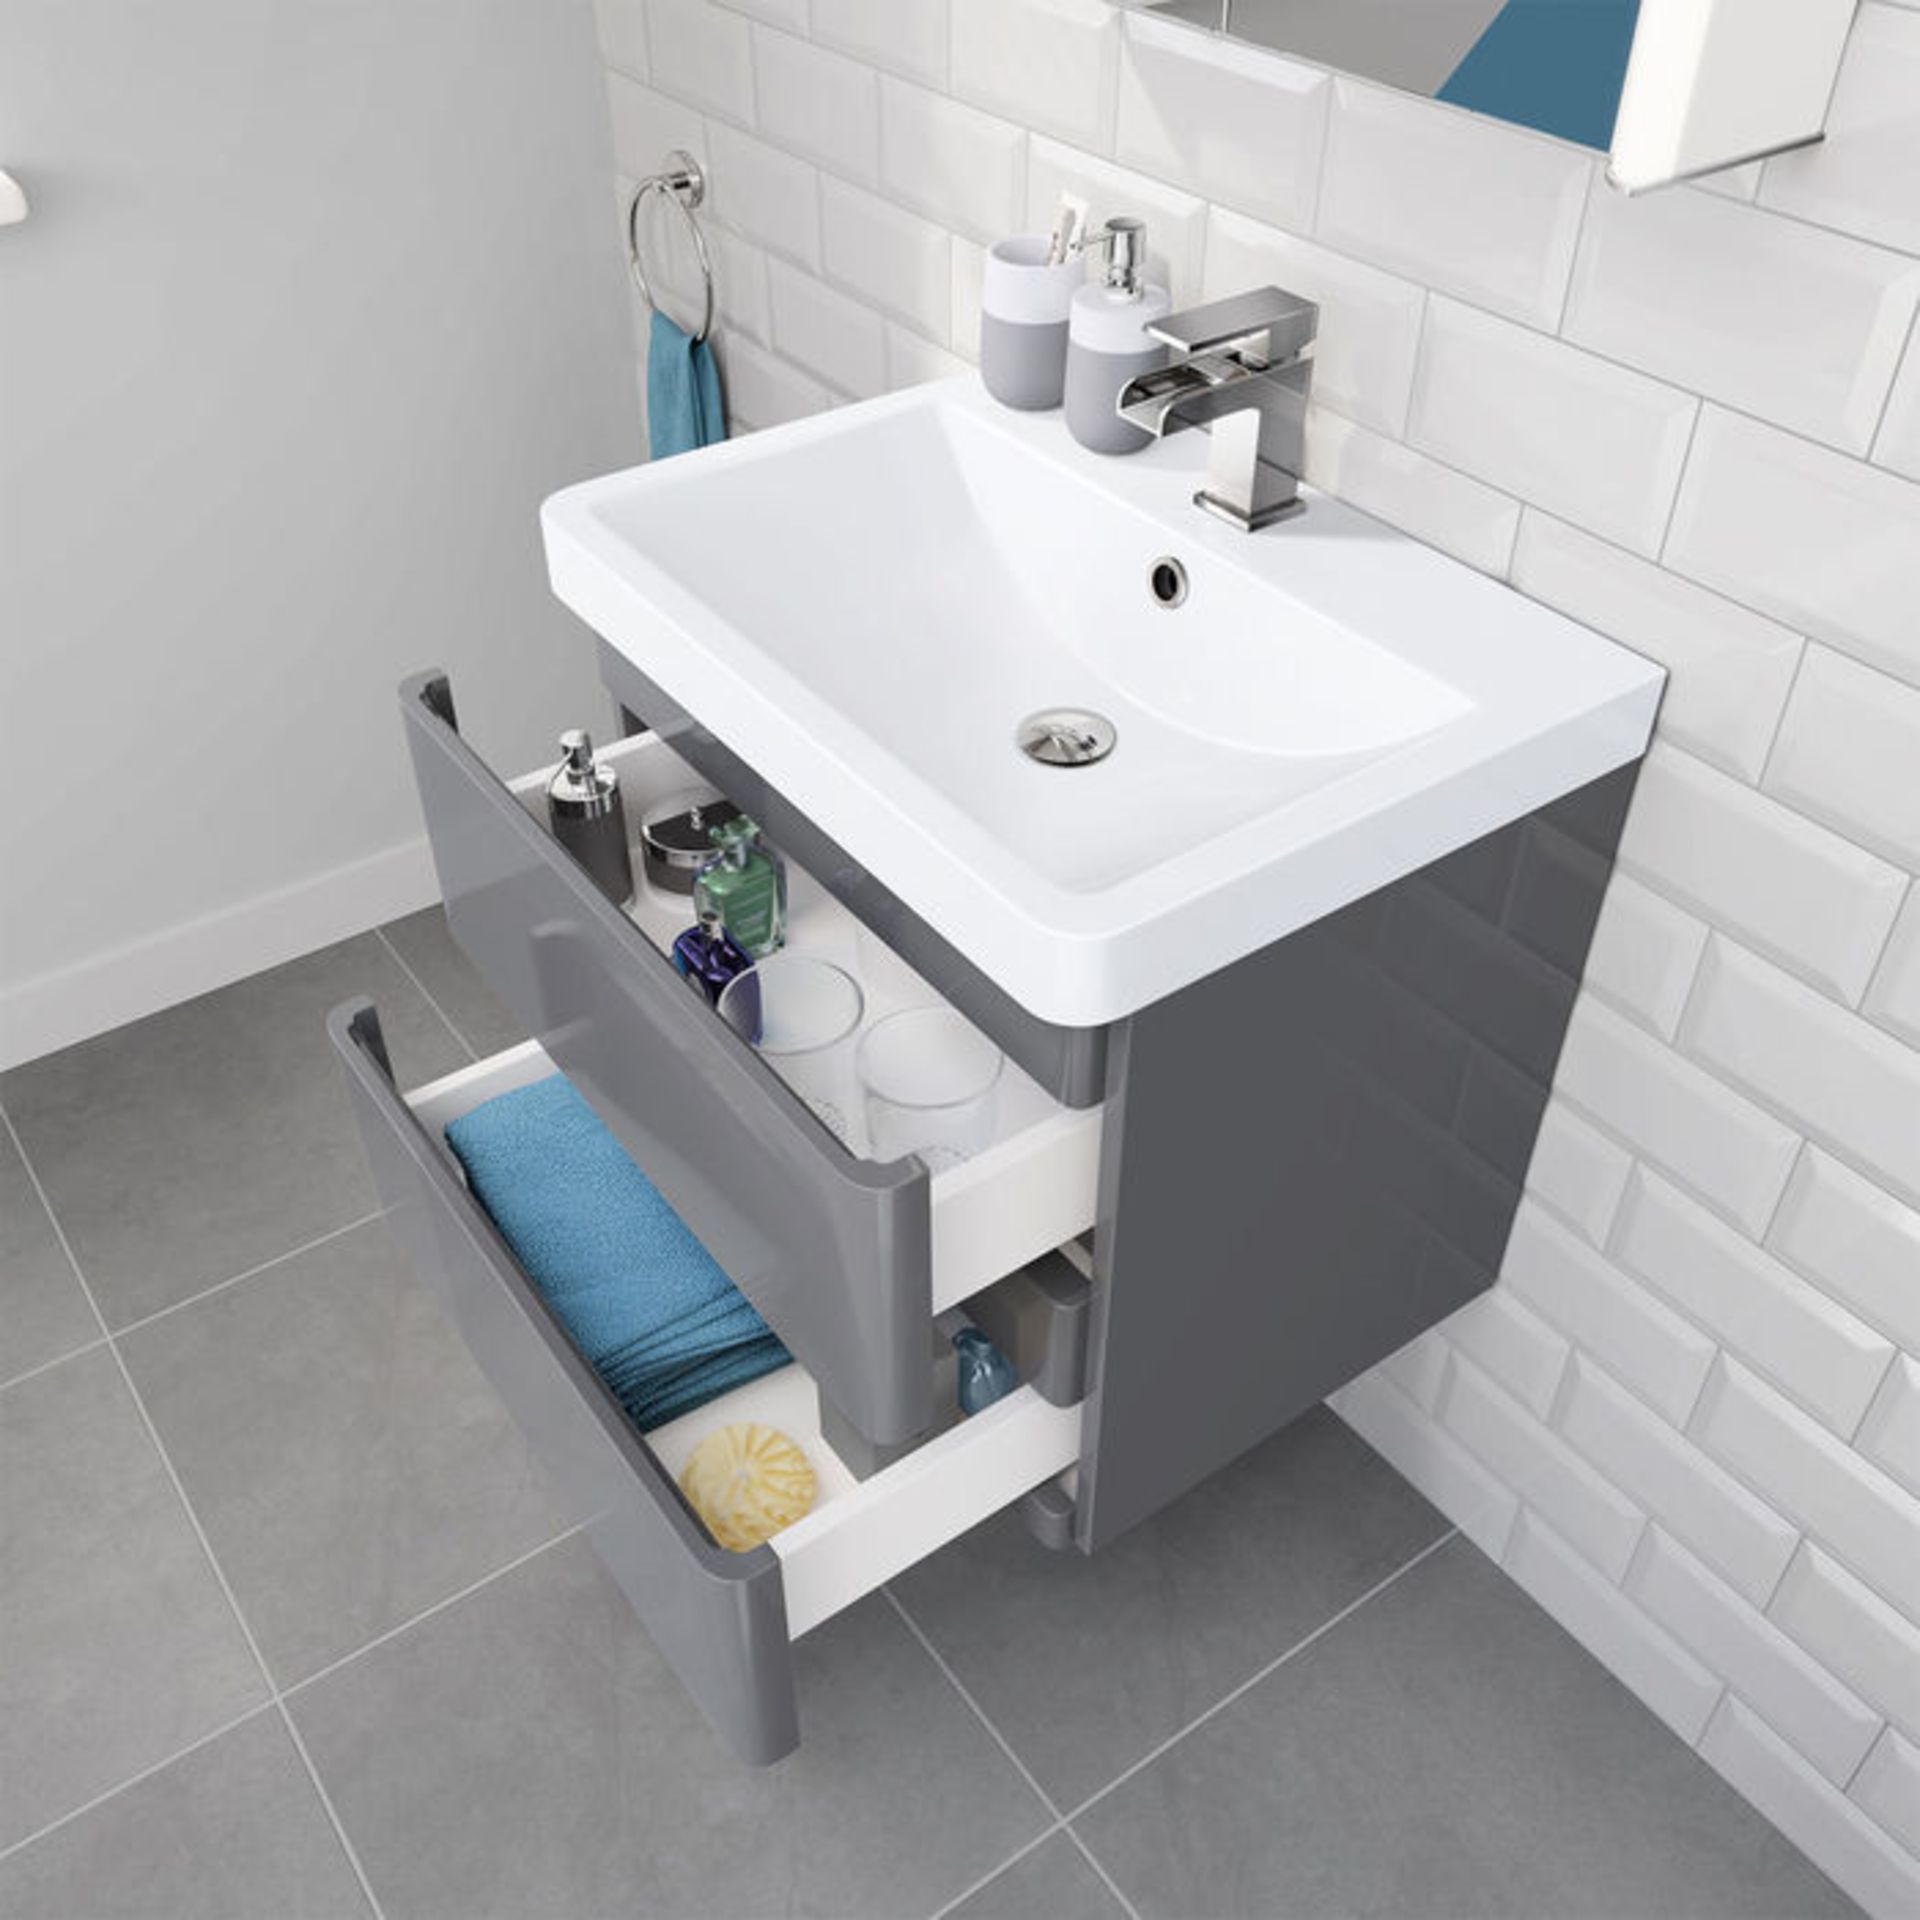 (CT51) 600mm Denver Gloss Grey Built In Basin Drawer Unit - Wall Hung. RRP £254.99. Comes complete - Image 2 of 4